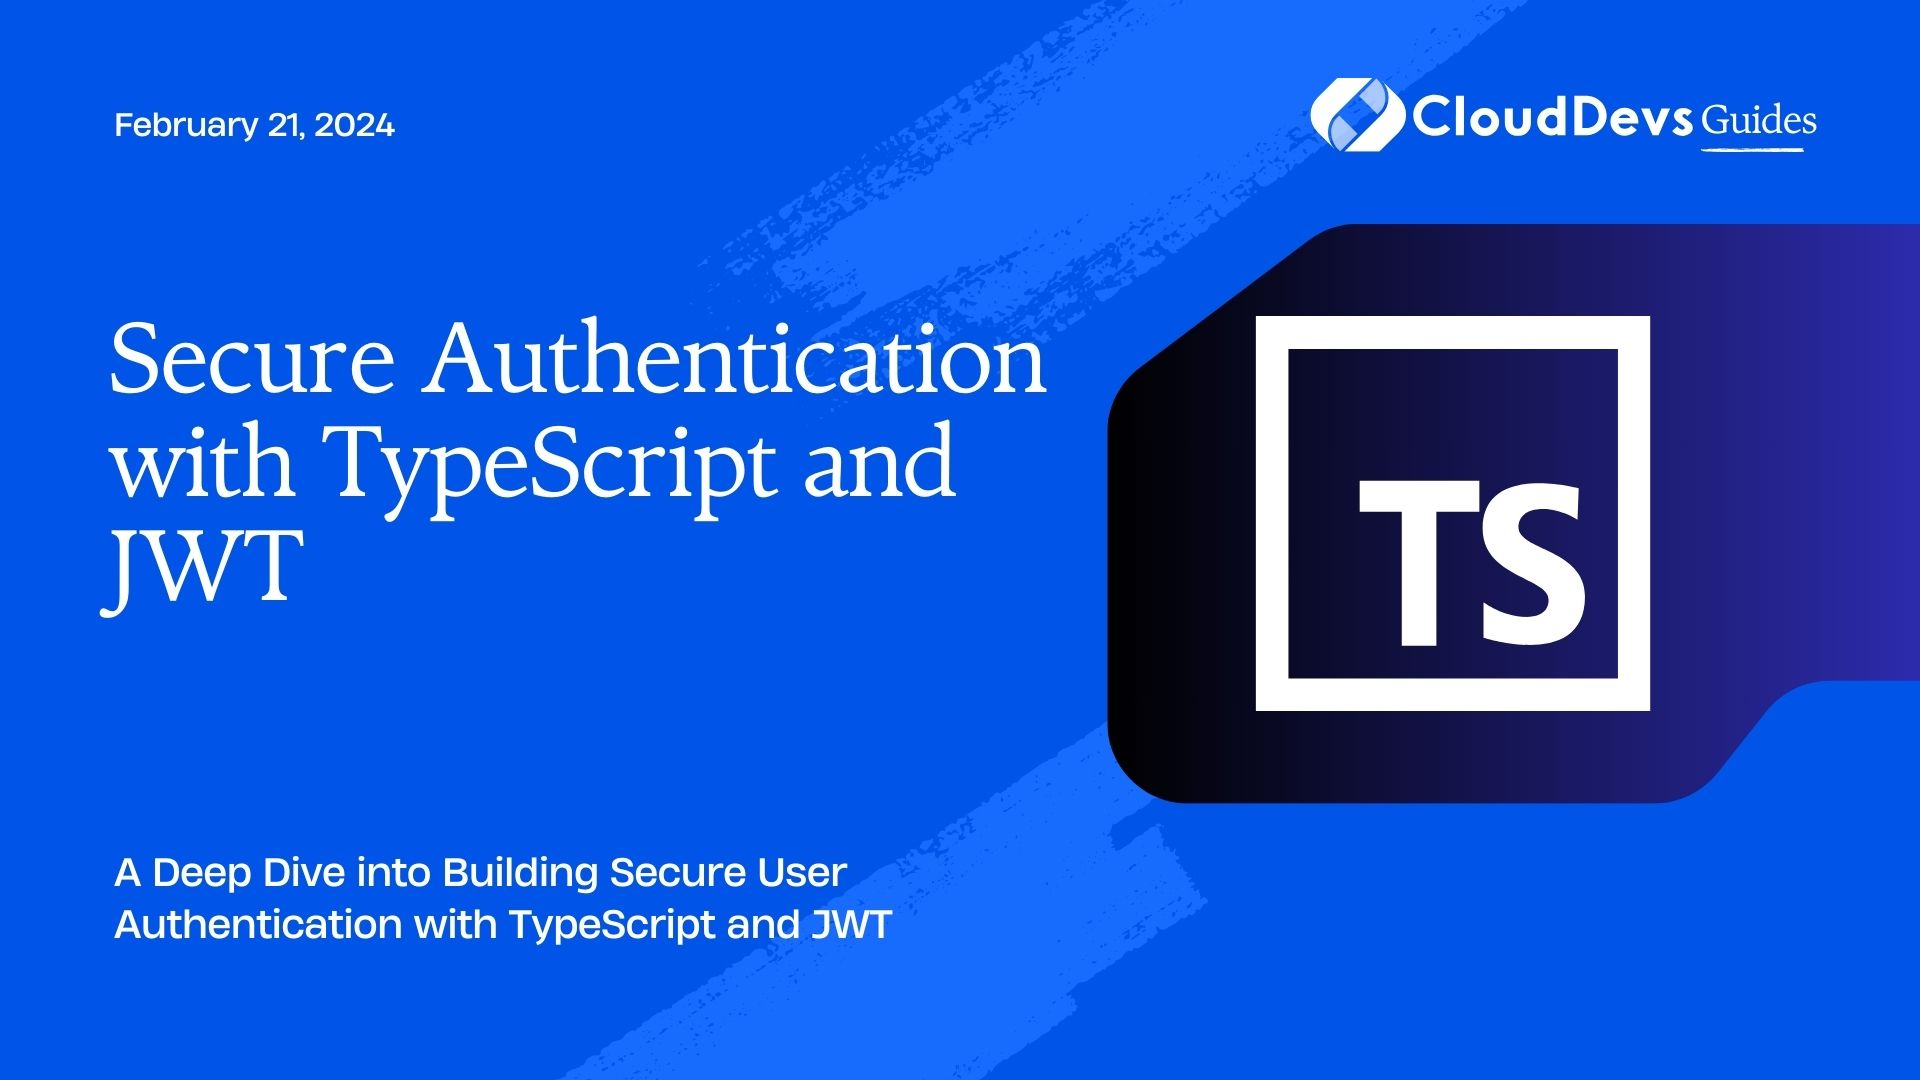 Secure Authentication with TypeScript and JWT